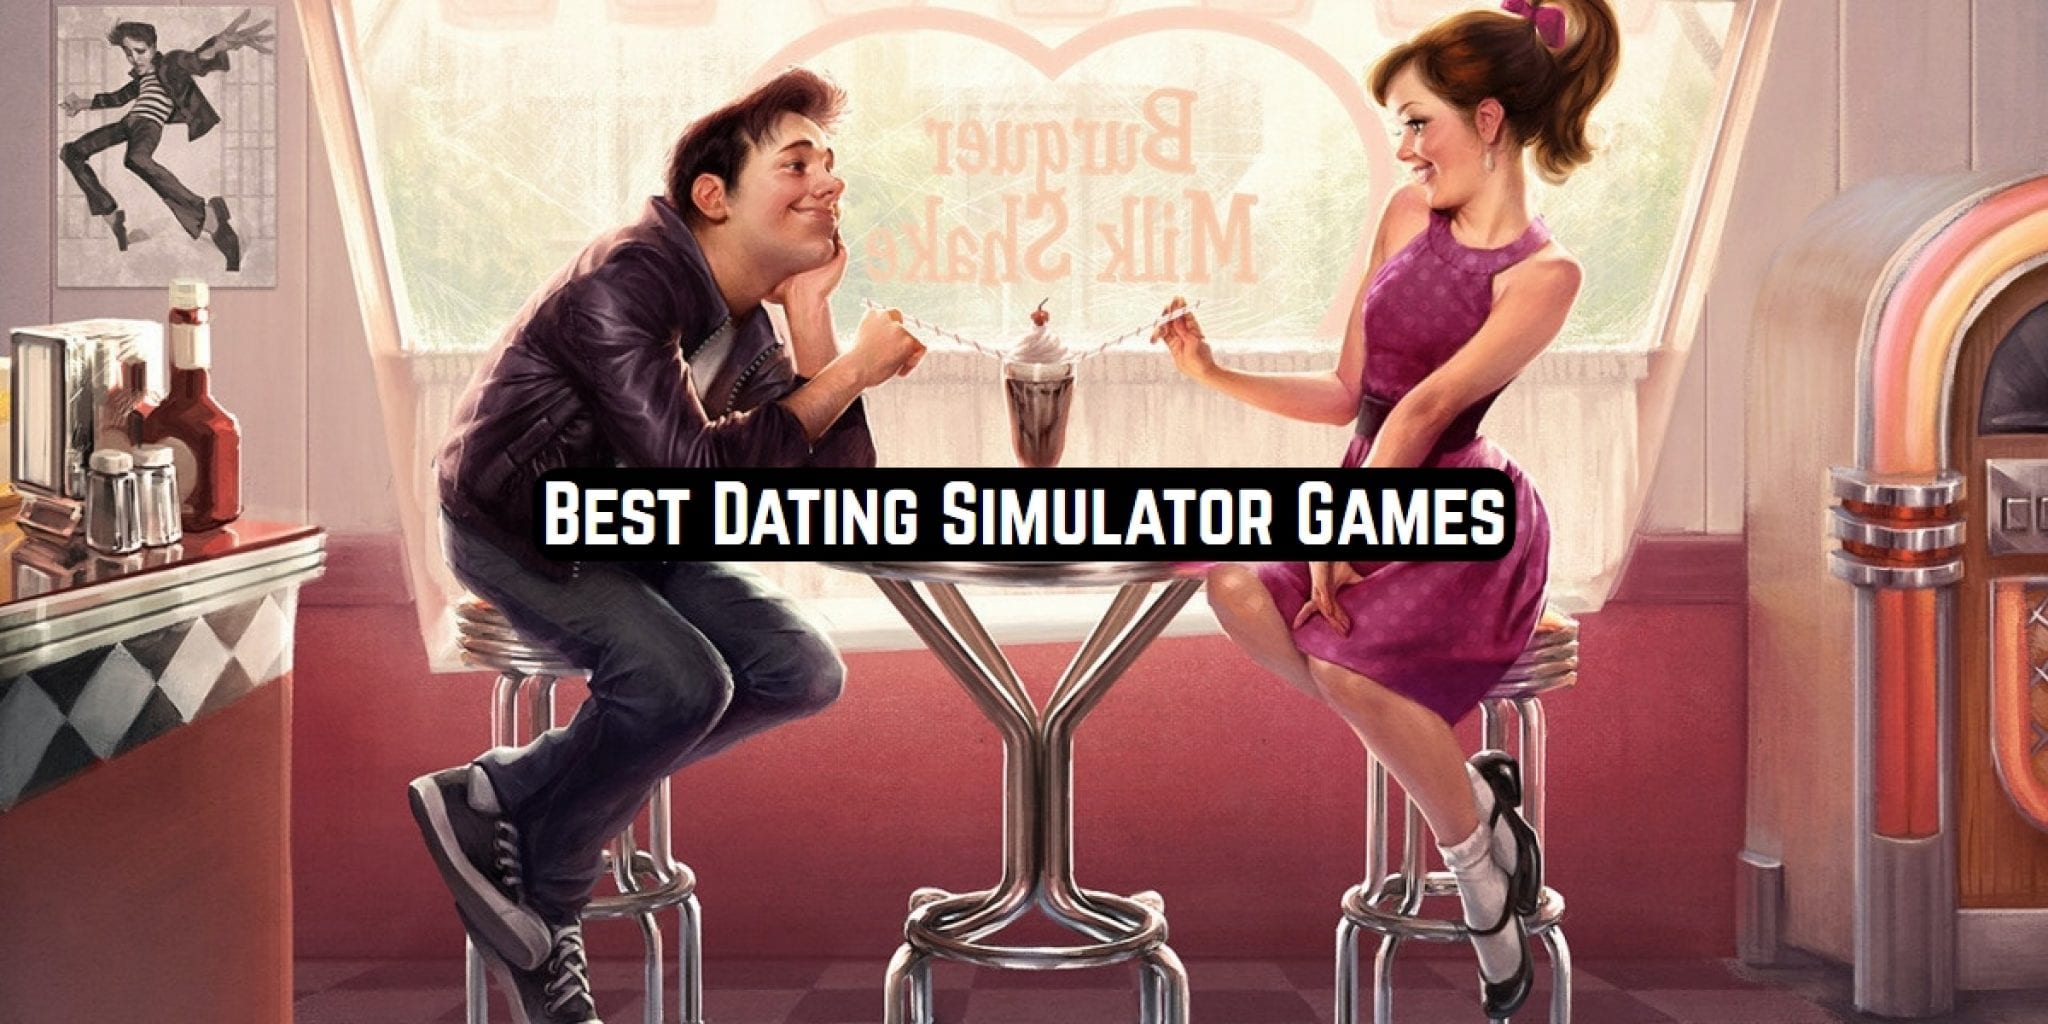 Love and dating games online | 40 Fun (And Free!) Online Dating Games ...